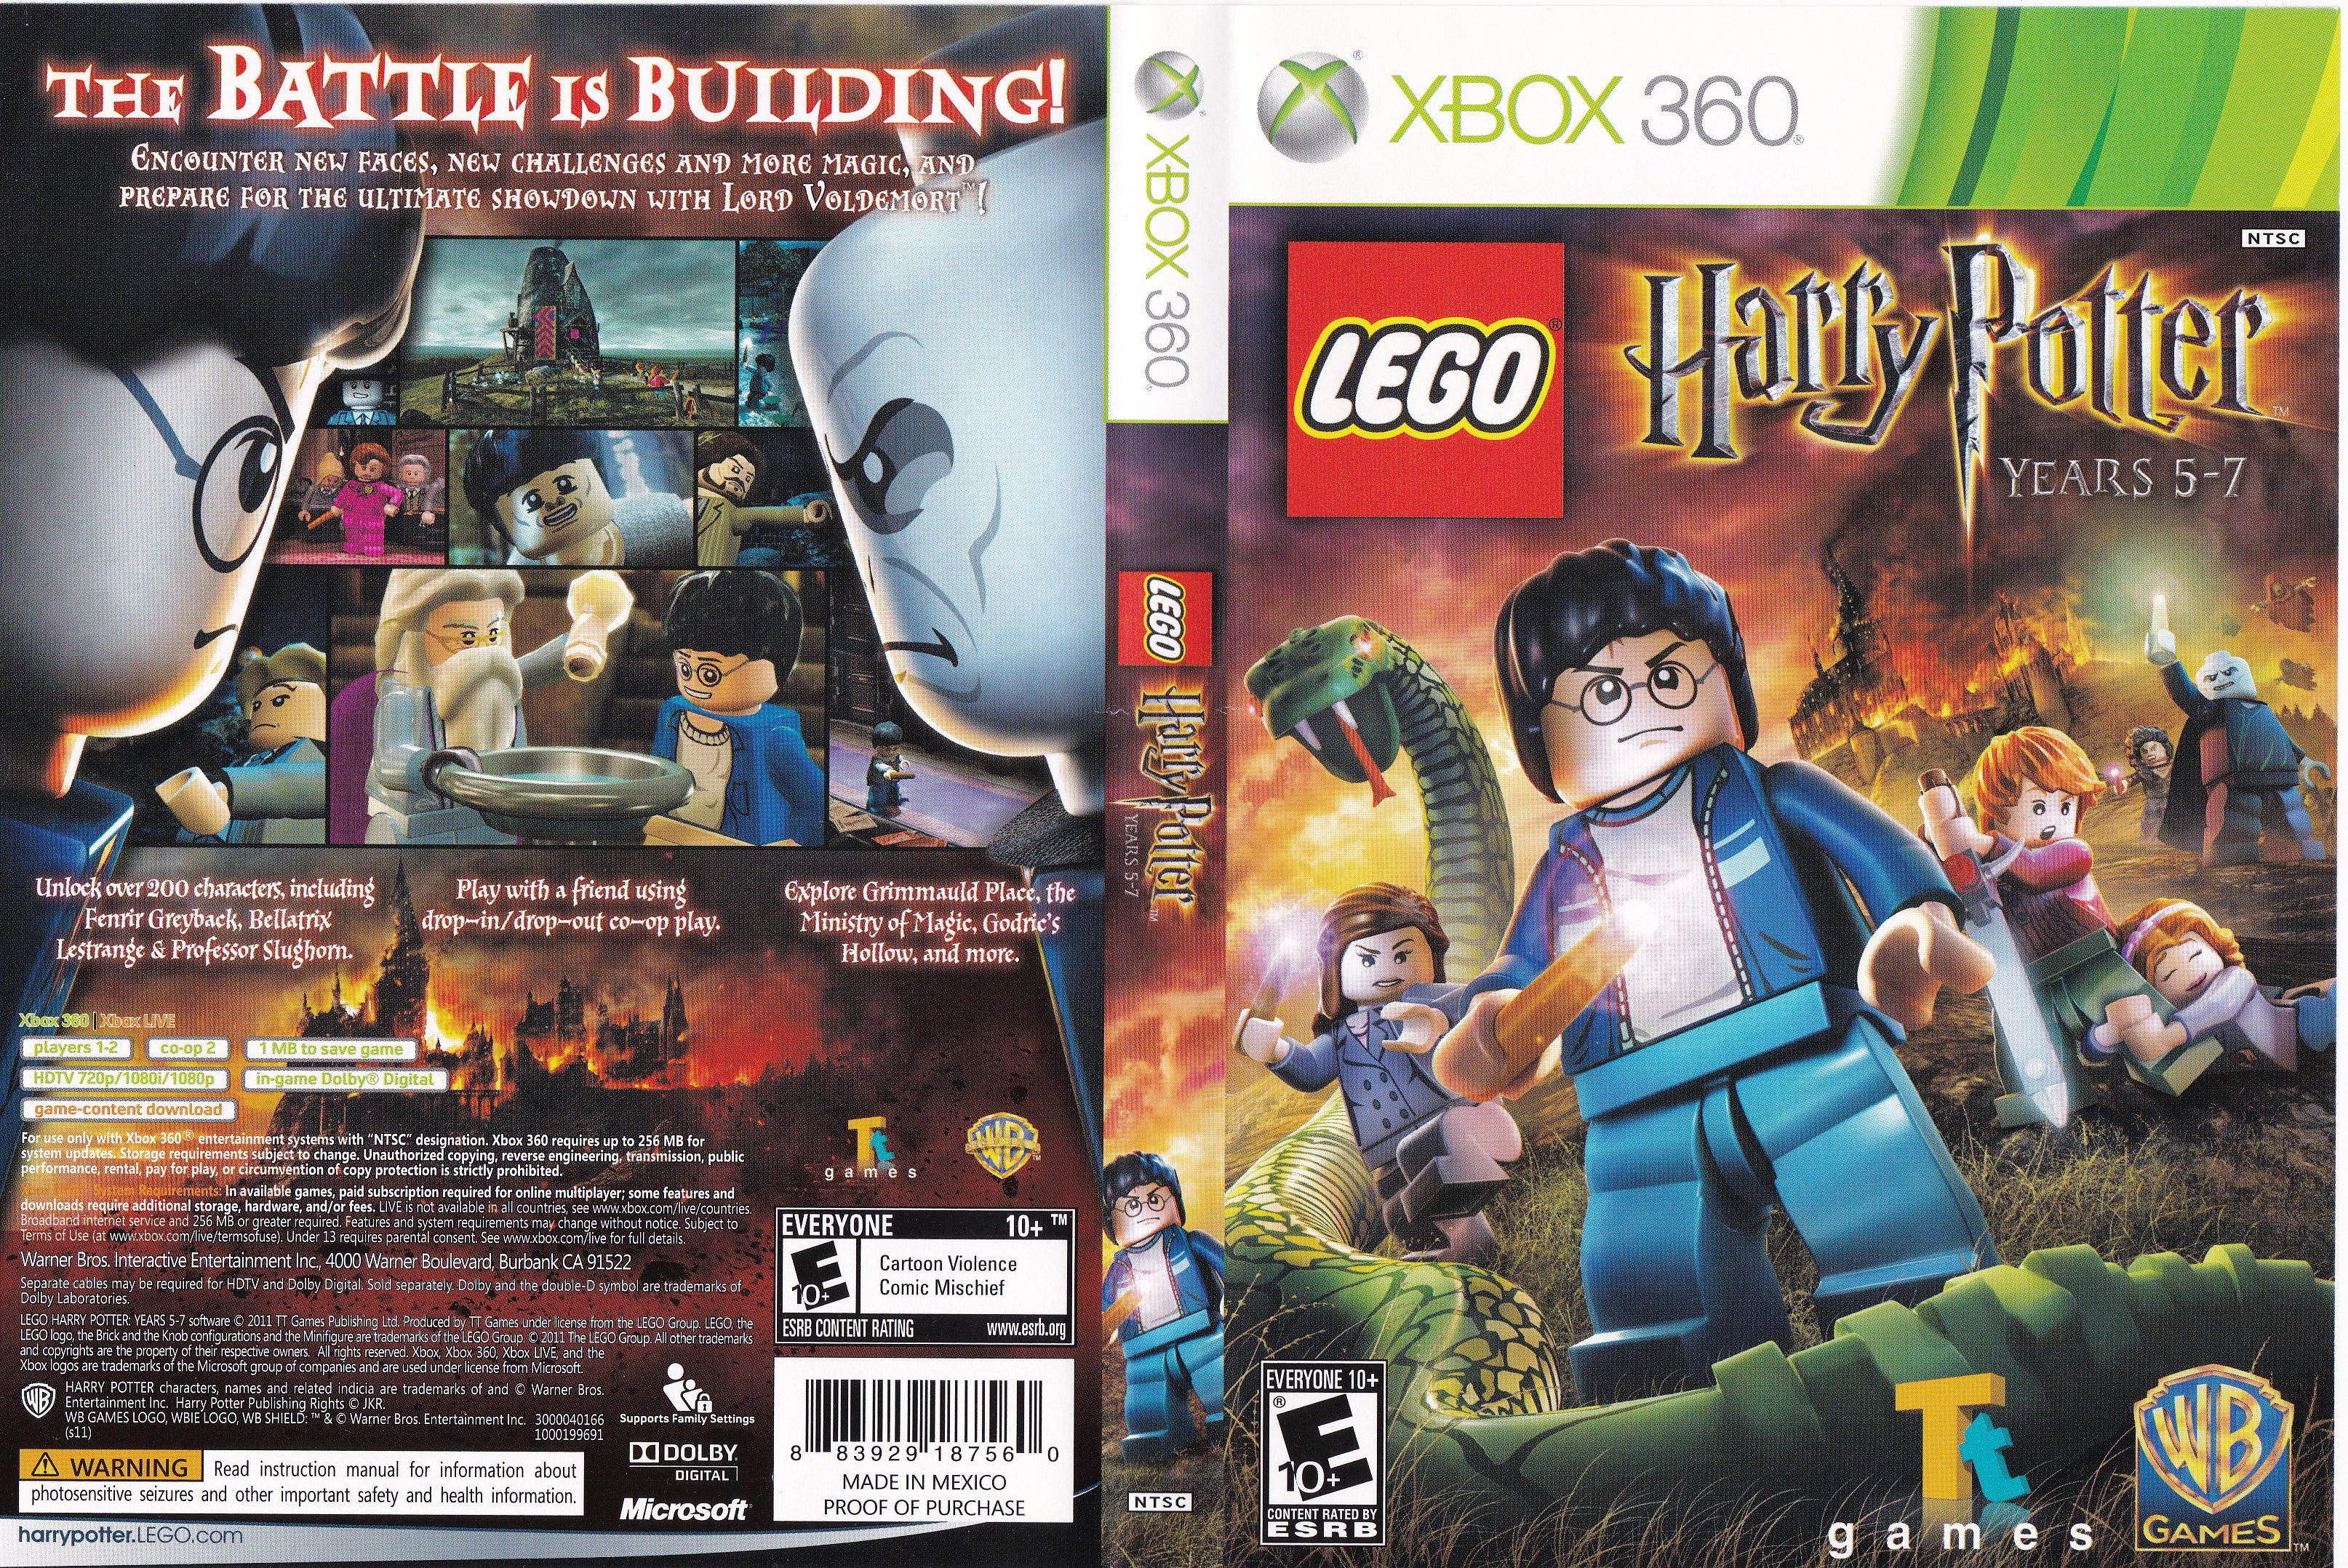 harry potter games for xbox 360